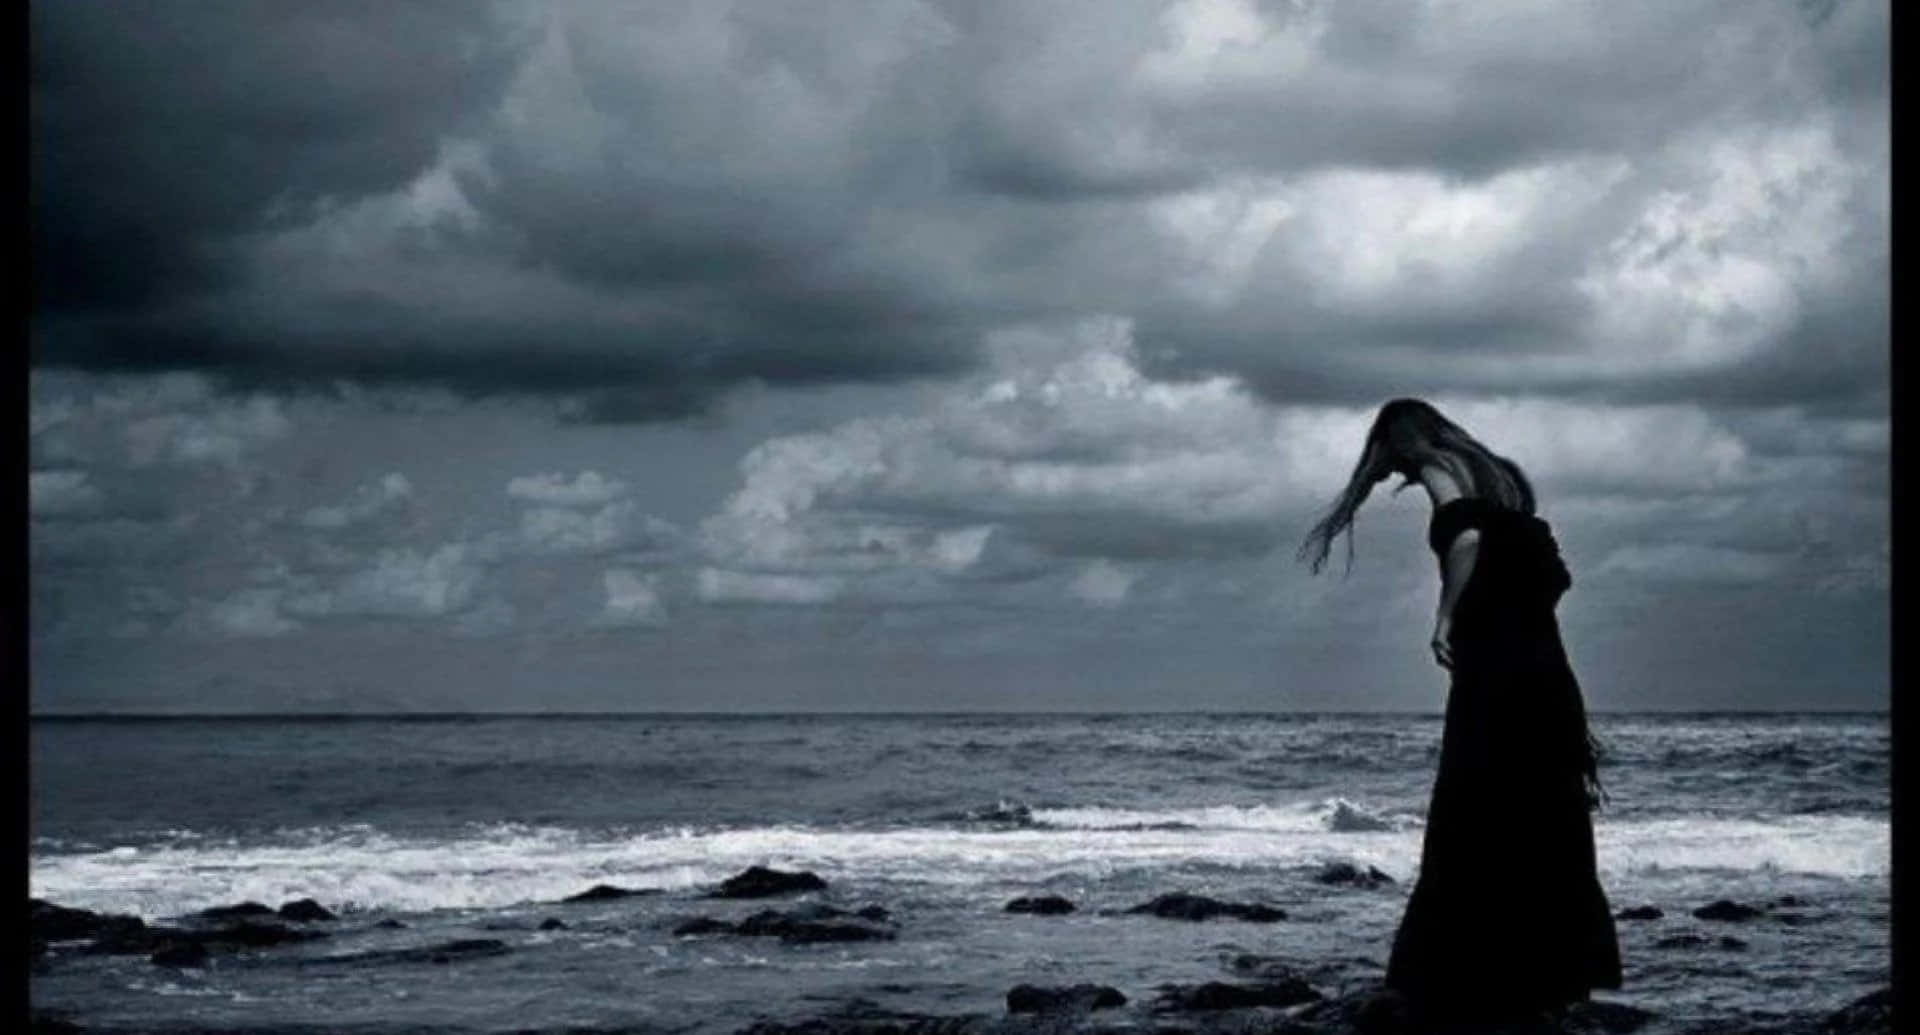 A Woman Standing On The Beach Under A Stormy Sky